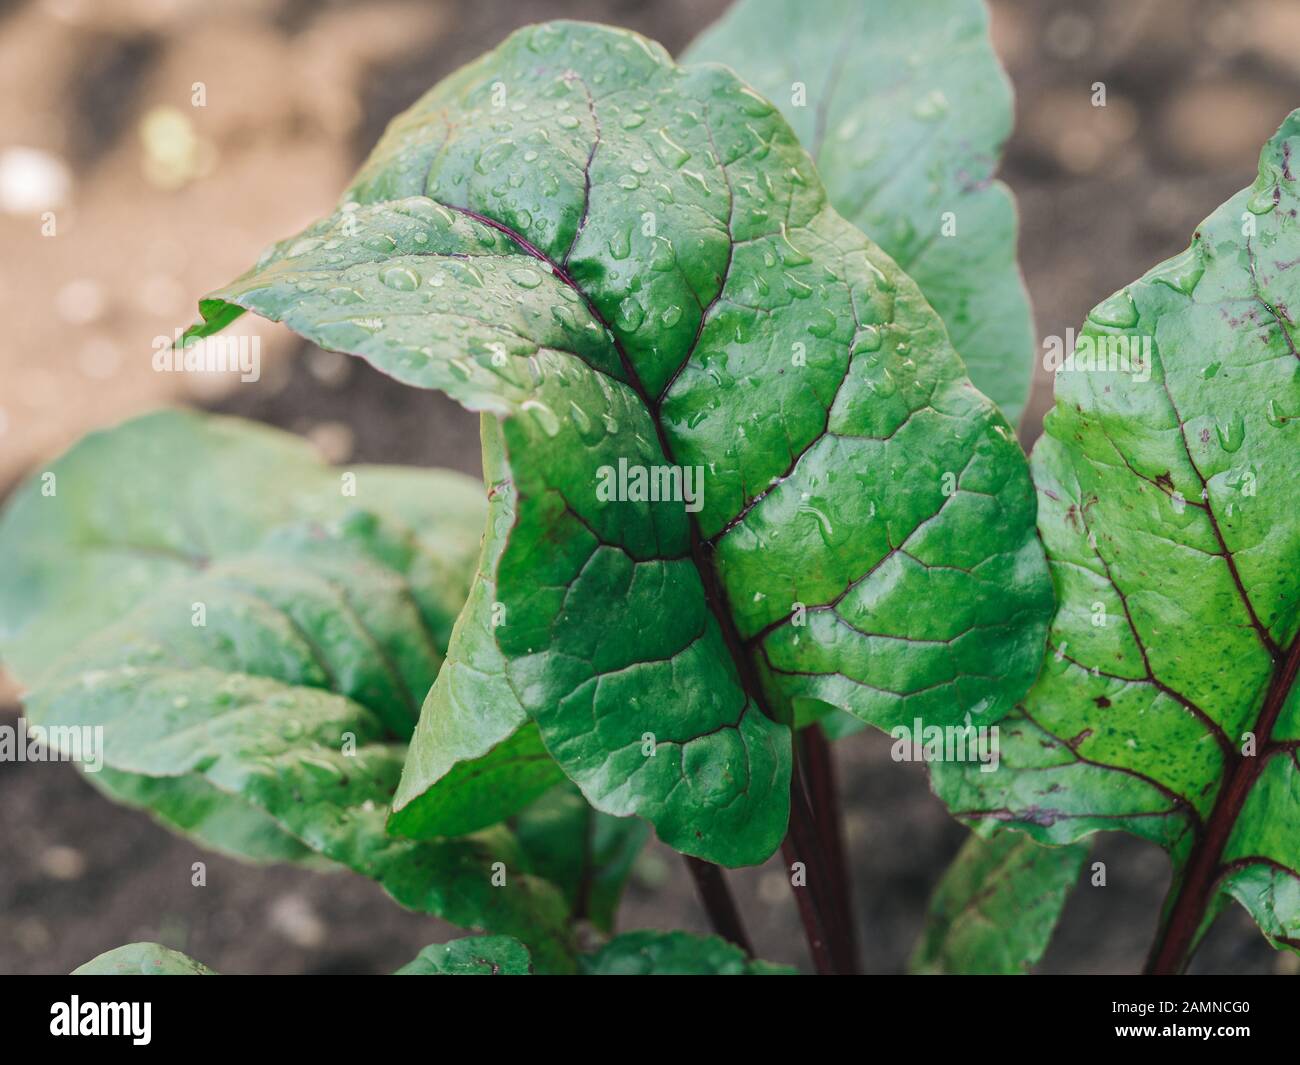 Organic Beet Grown in Garden. Beet or chard leaves in garden, natural daylight. Copy space for text. Organic vegetables, vegan, vegetable market concept. Stock Photo